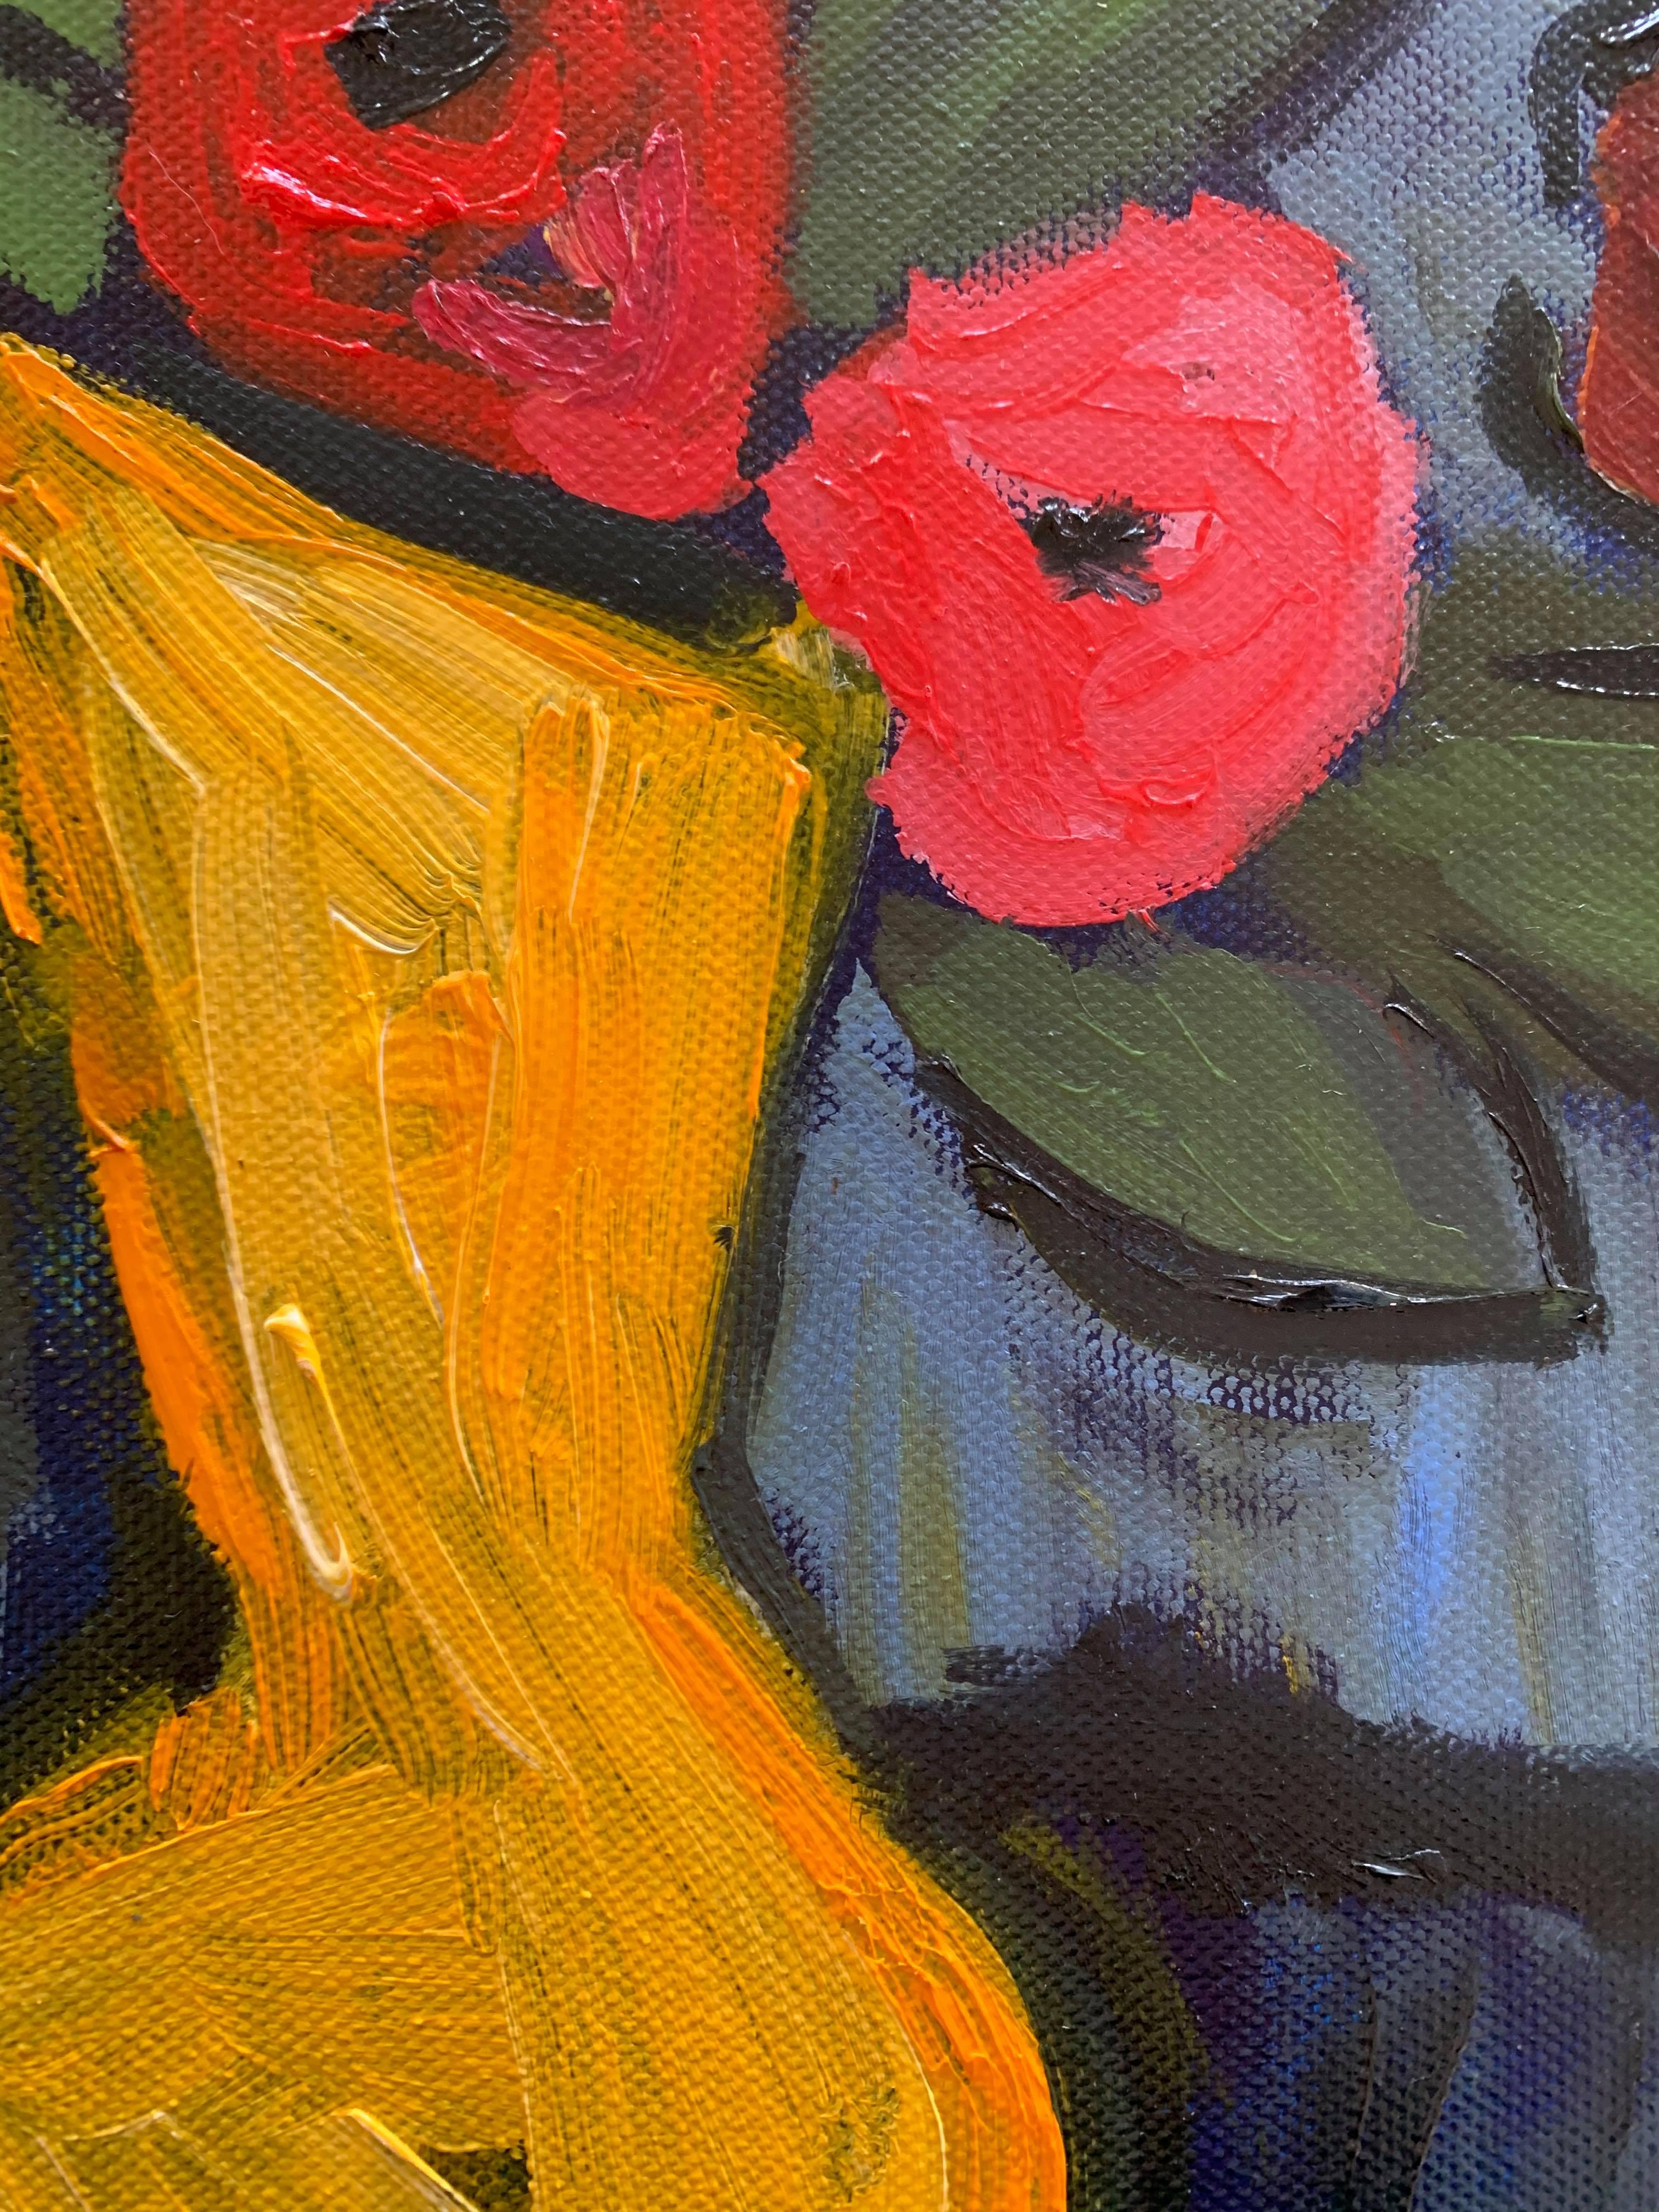 This oil on canvas painting is a still-life of a vase of flowers. The evident mark created by the brushstrokes is reminiscent of Cezanne and Impressionism. The vase is a striking lemon yellow, with alizarin and cadmium poppies in front of a navy